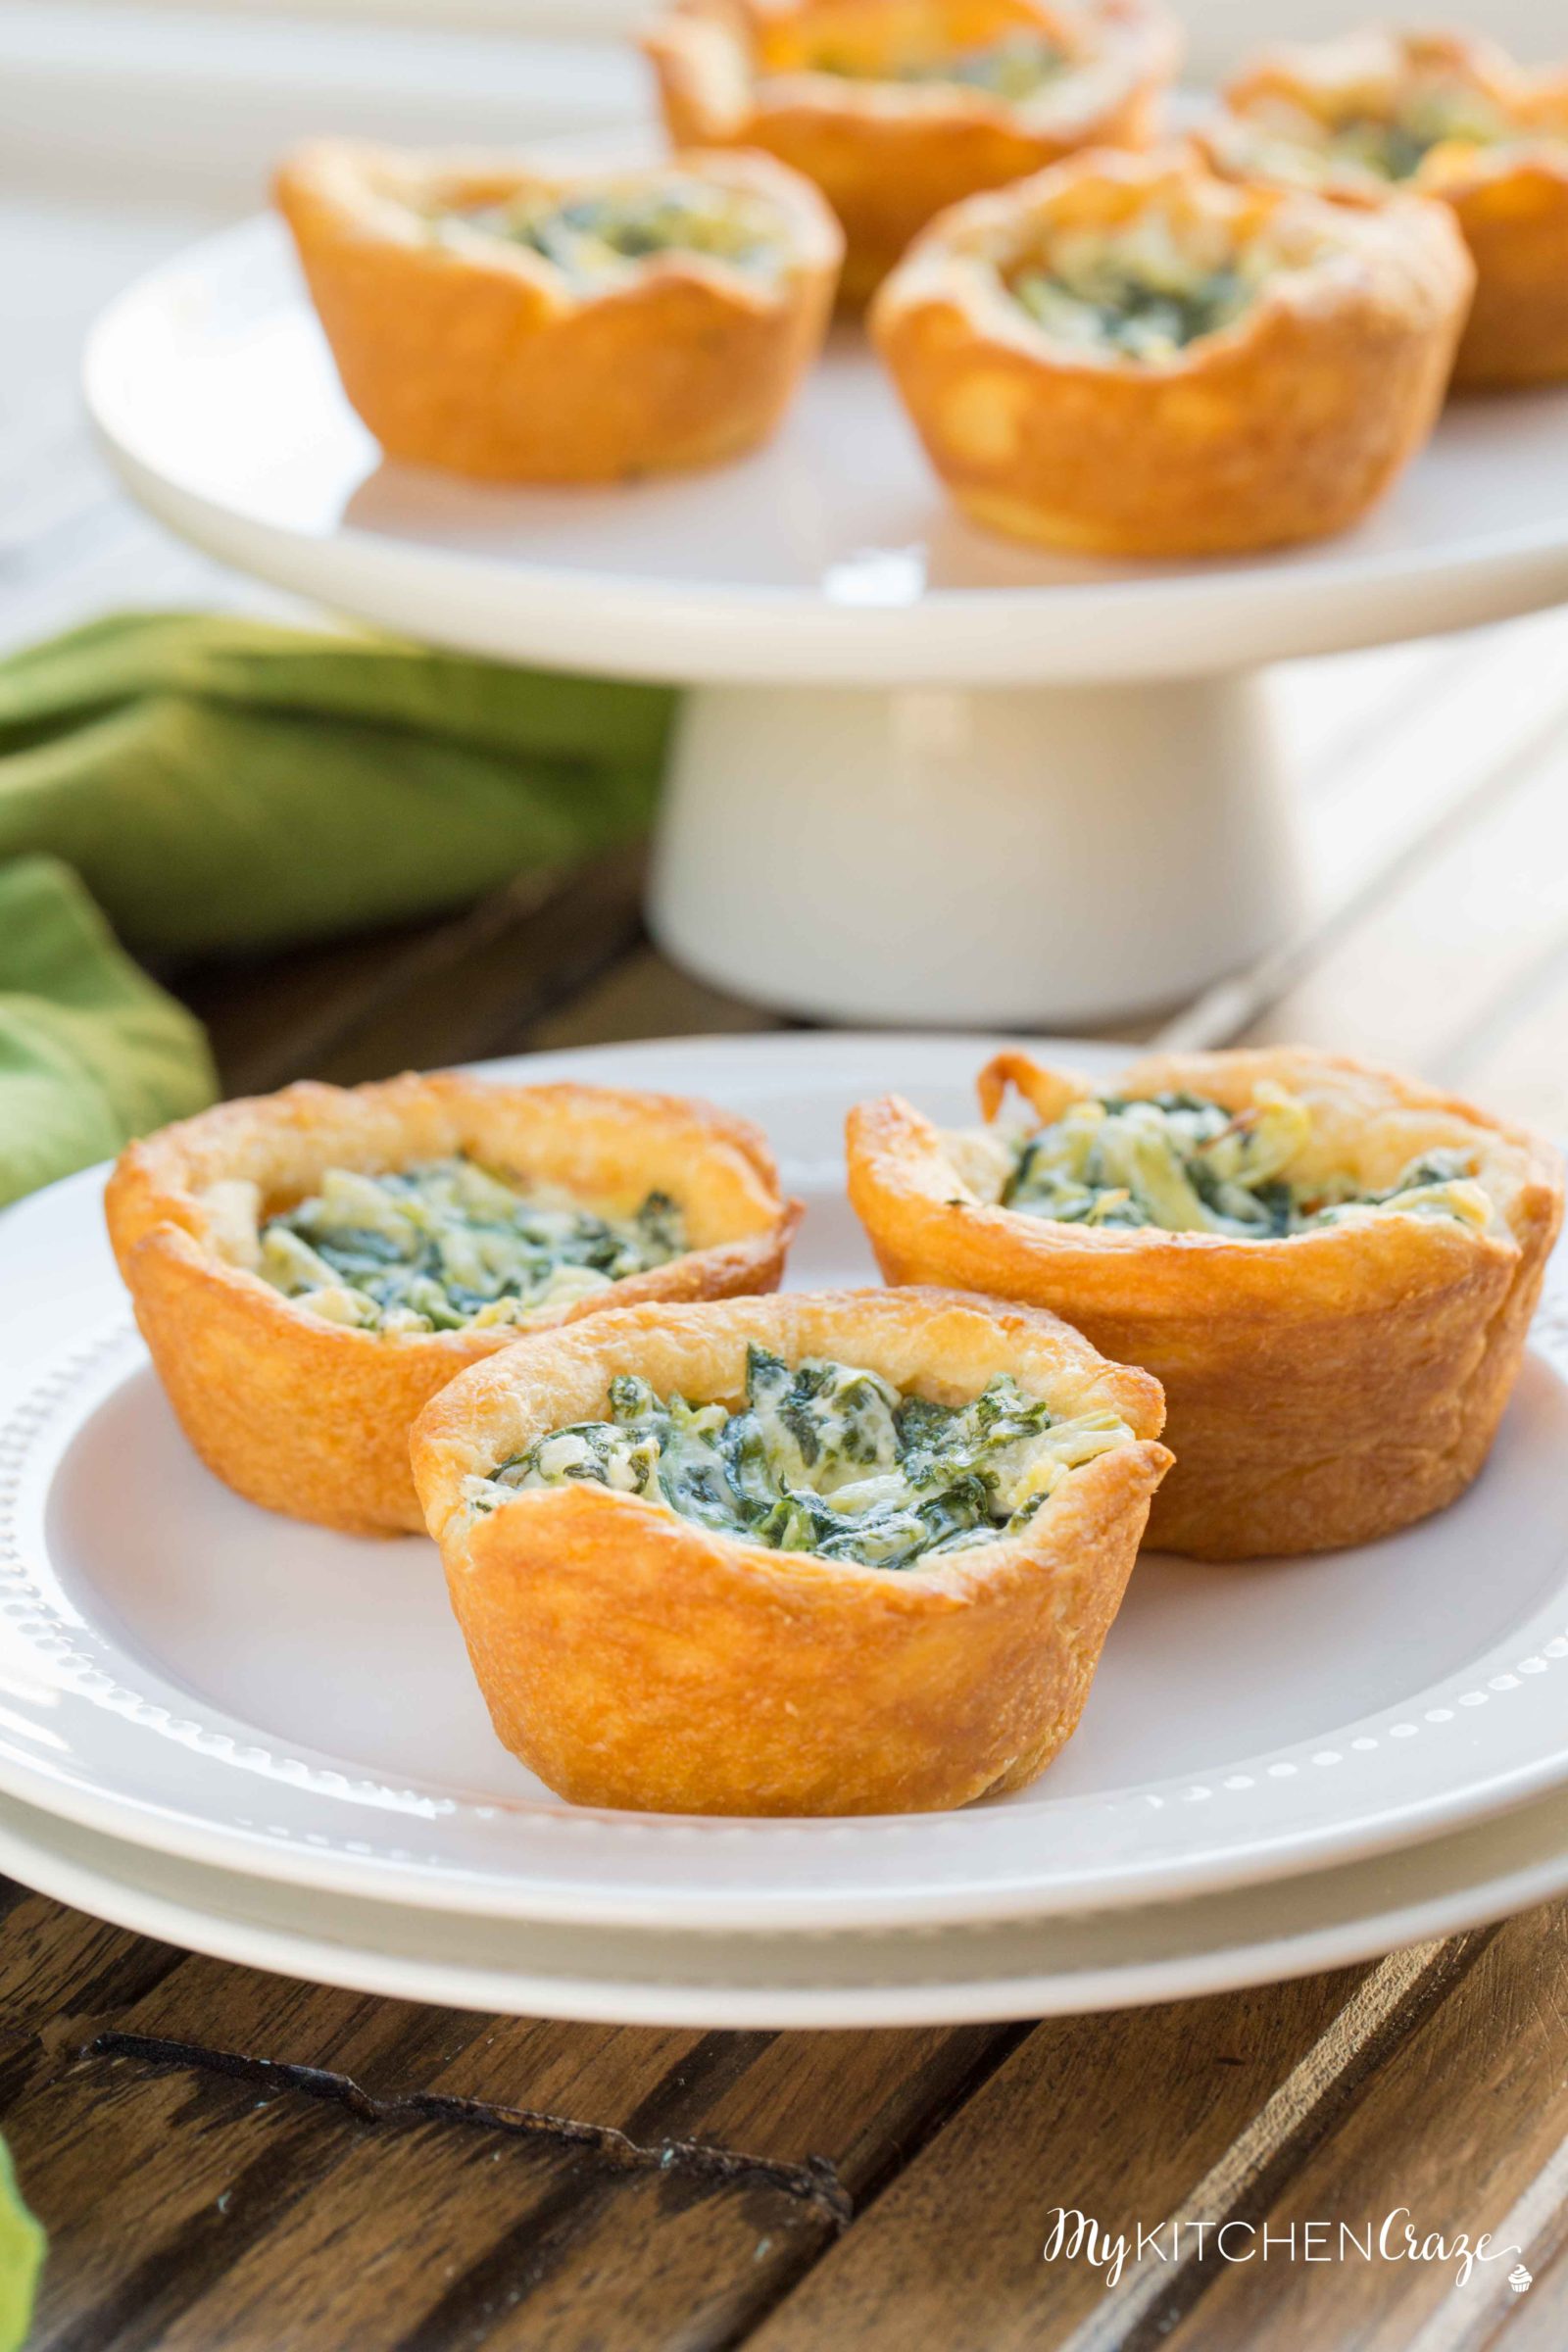 Spinach Artichoke Cups ~ mykitchencraze.com ~ This appetizer is perfect for any potlucks or parties. They take no time at all to make and taste delicious. Your guest won't be able to eat just one!